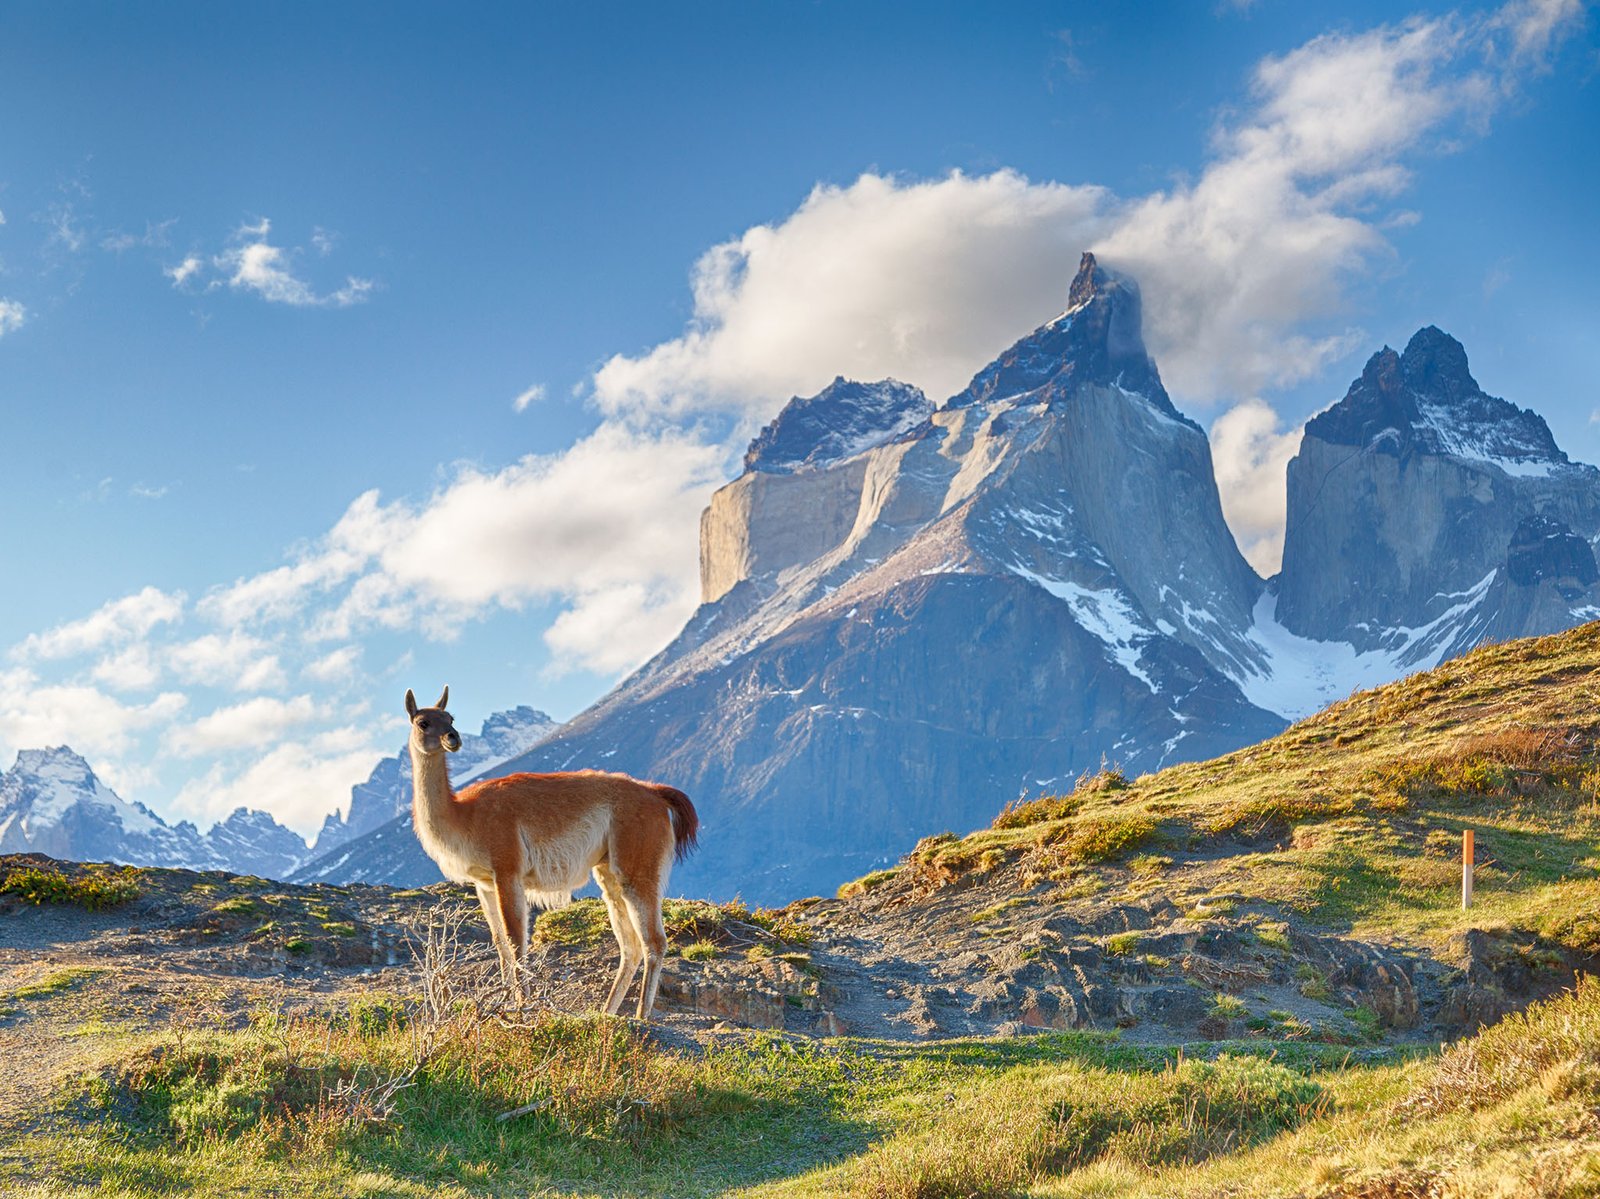 Chilean Patagonia is one of the cleanest places on the planet - Serious Facts